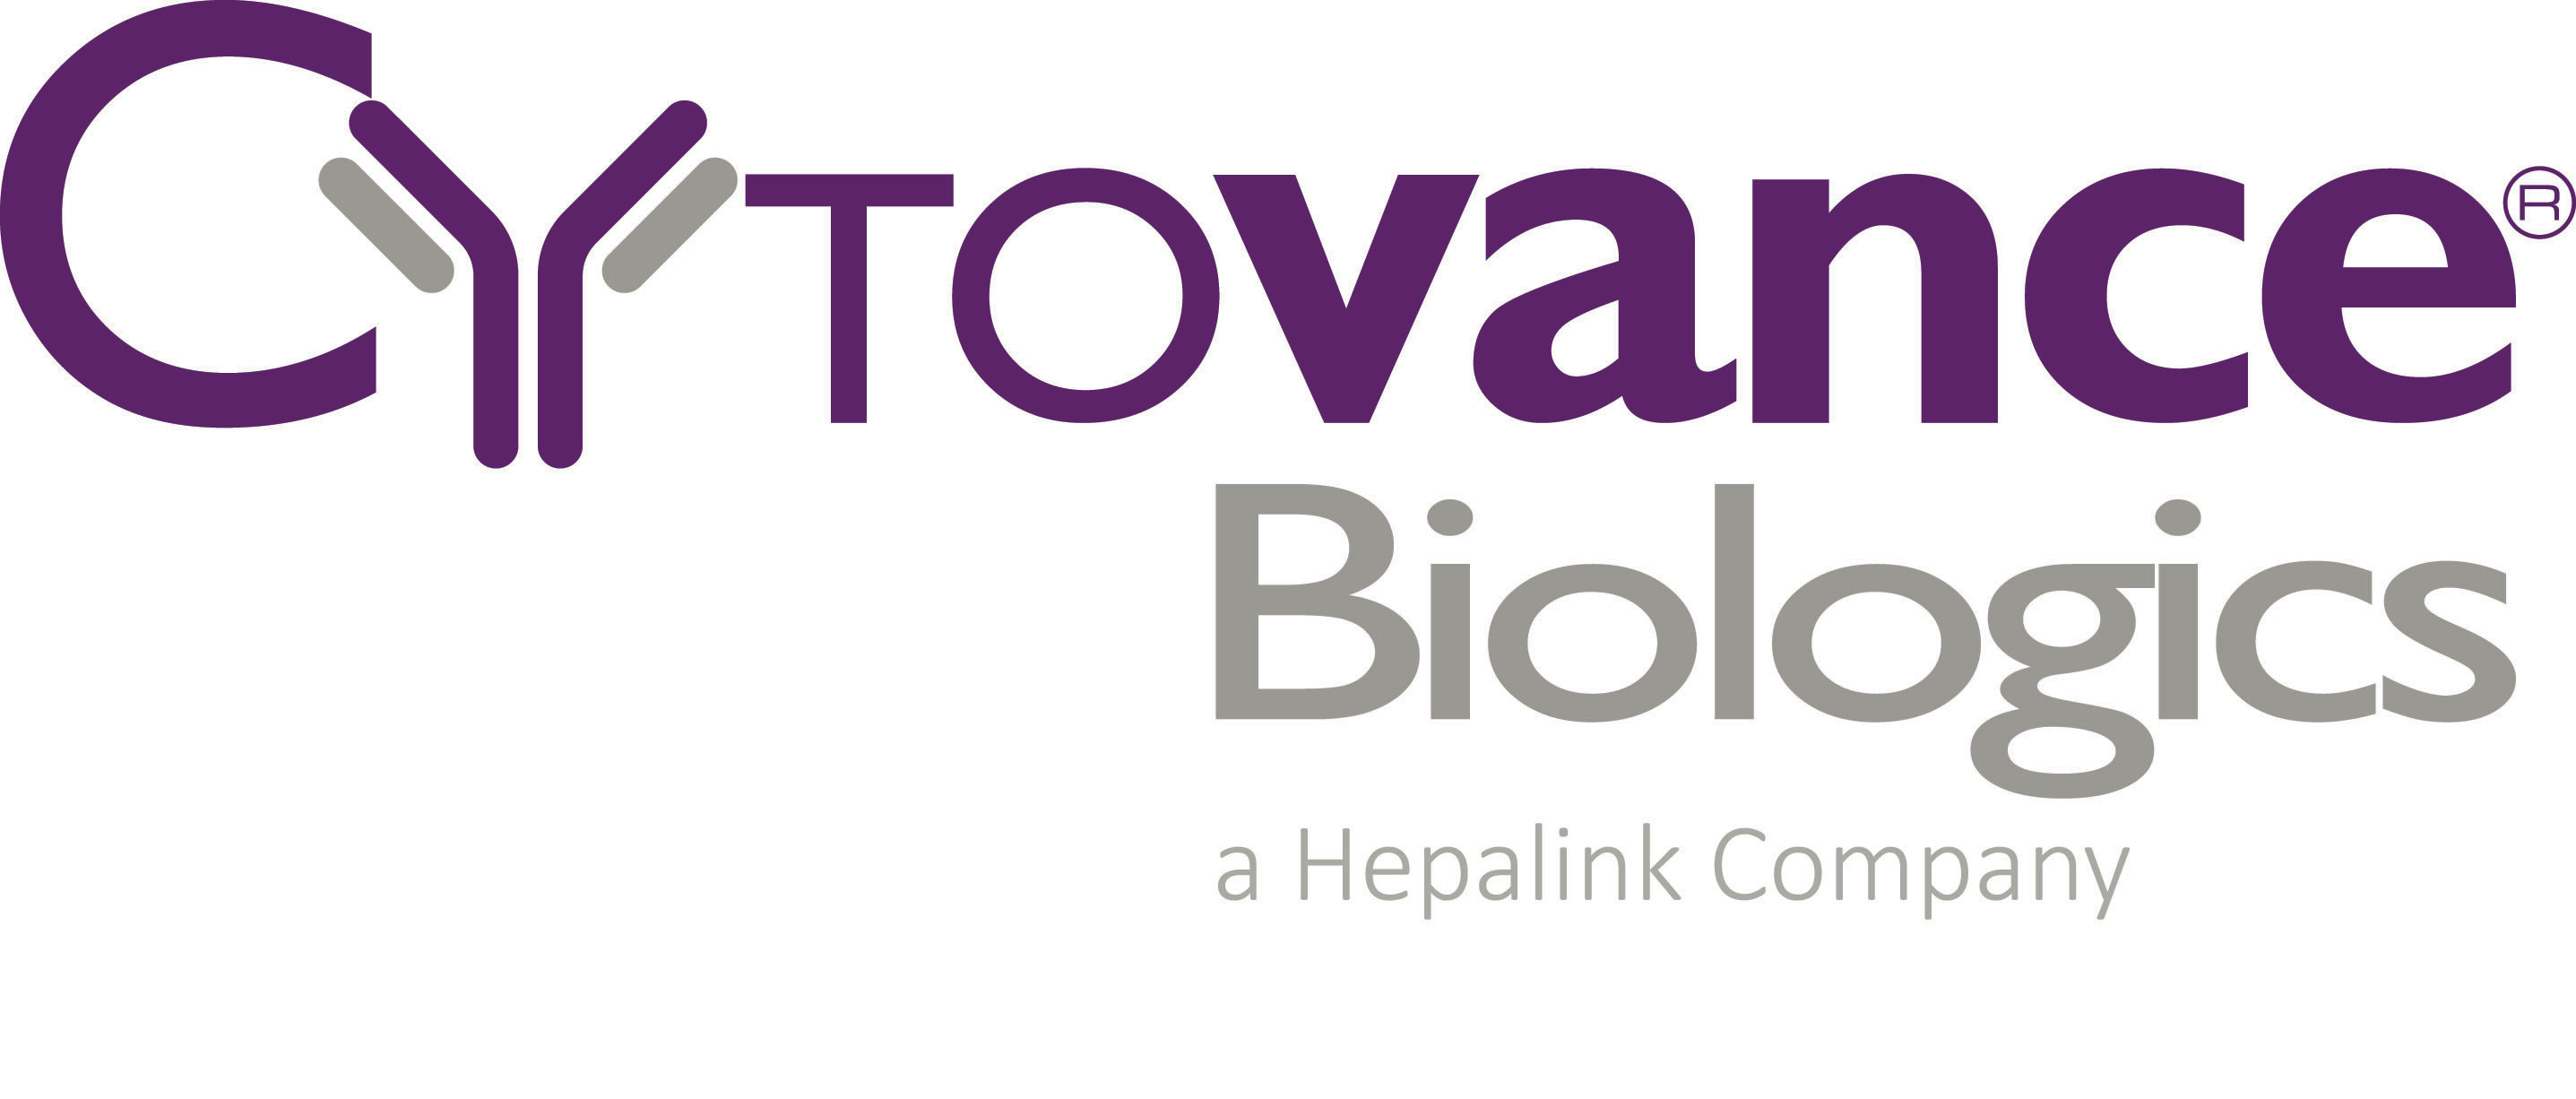 Cytovance Biologics and Phenotypeca Collaborate to Enhance Saccharomyces cerevis..